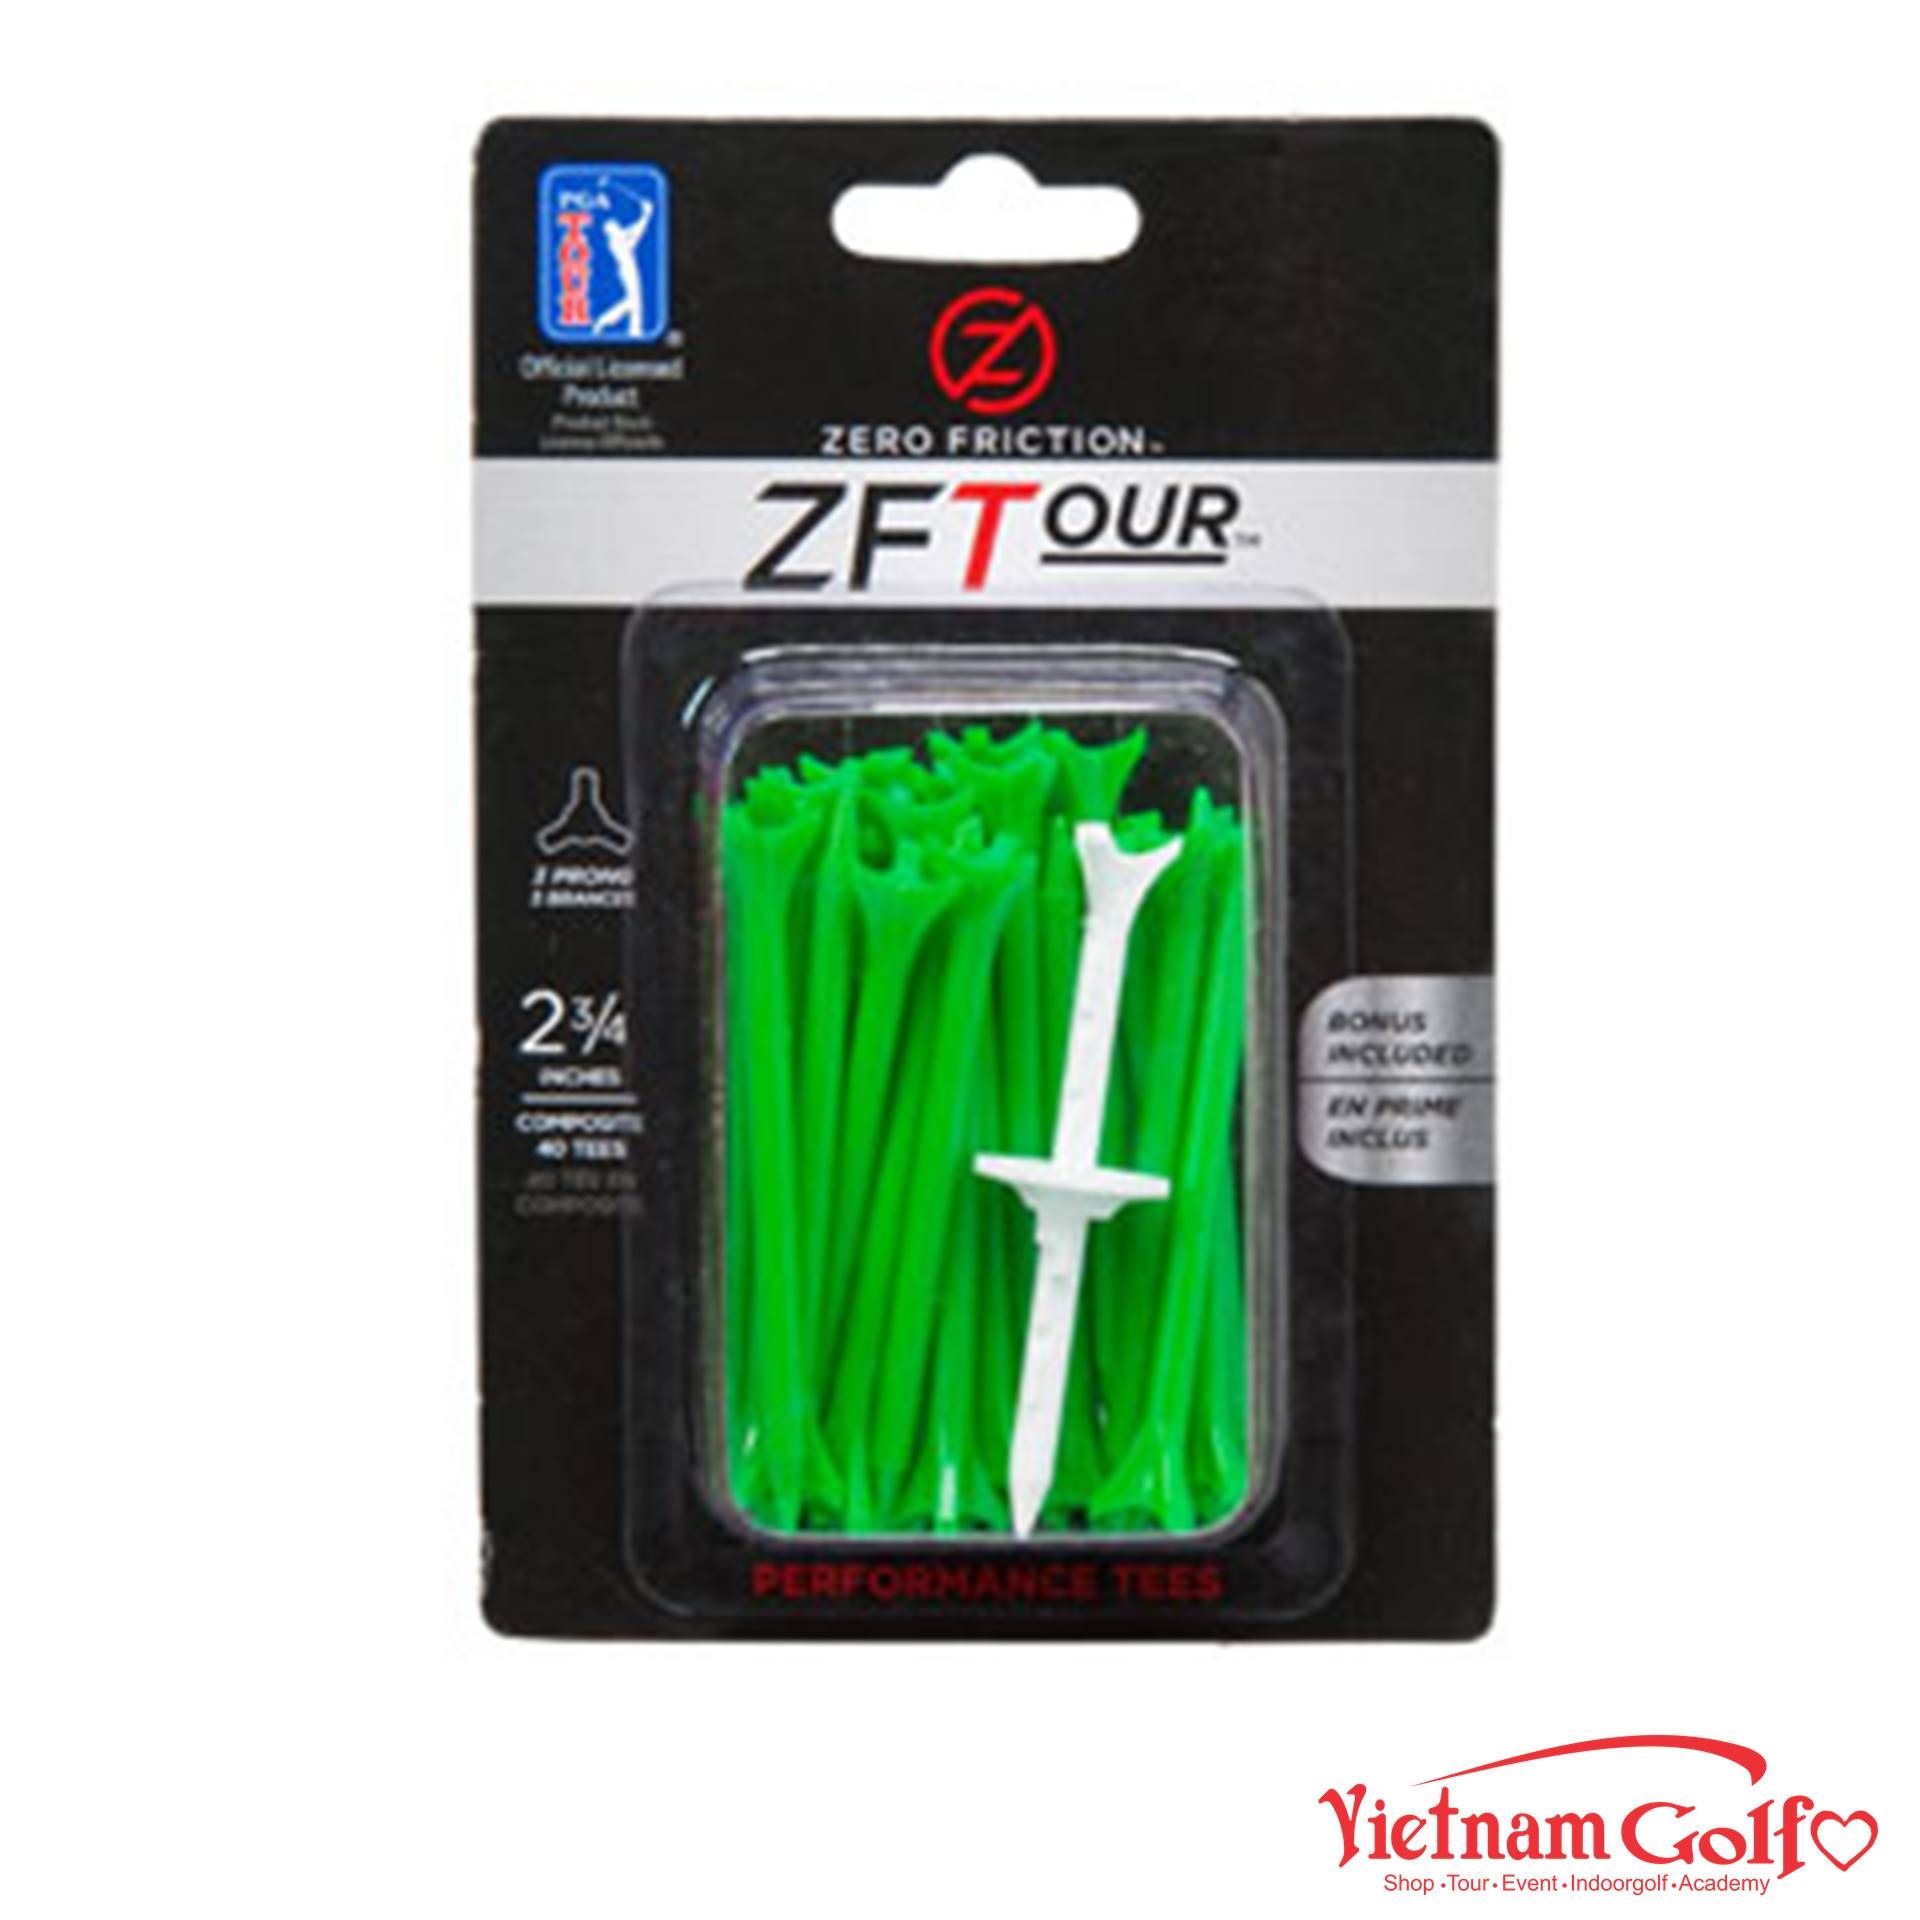 Zero Friction Zftour Golf Tees 40 Count Green